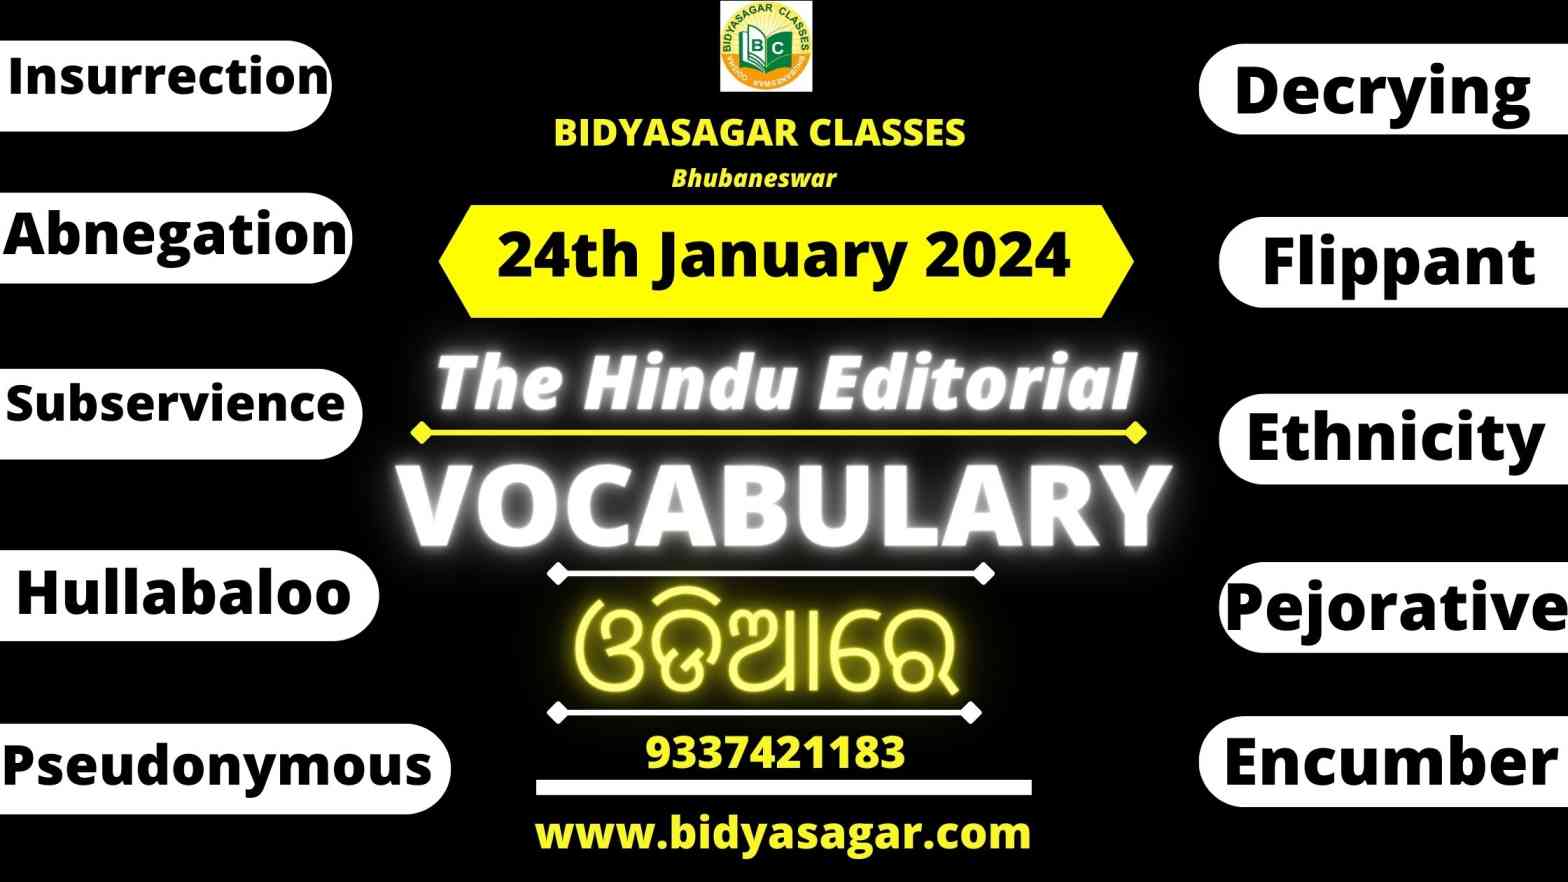 The Hindu Editorial Vocabulary of 24th January 2024